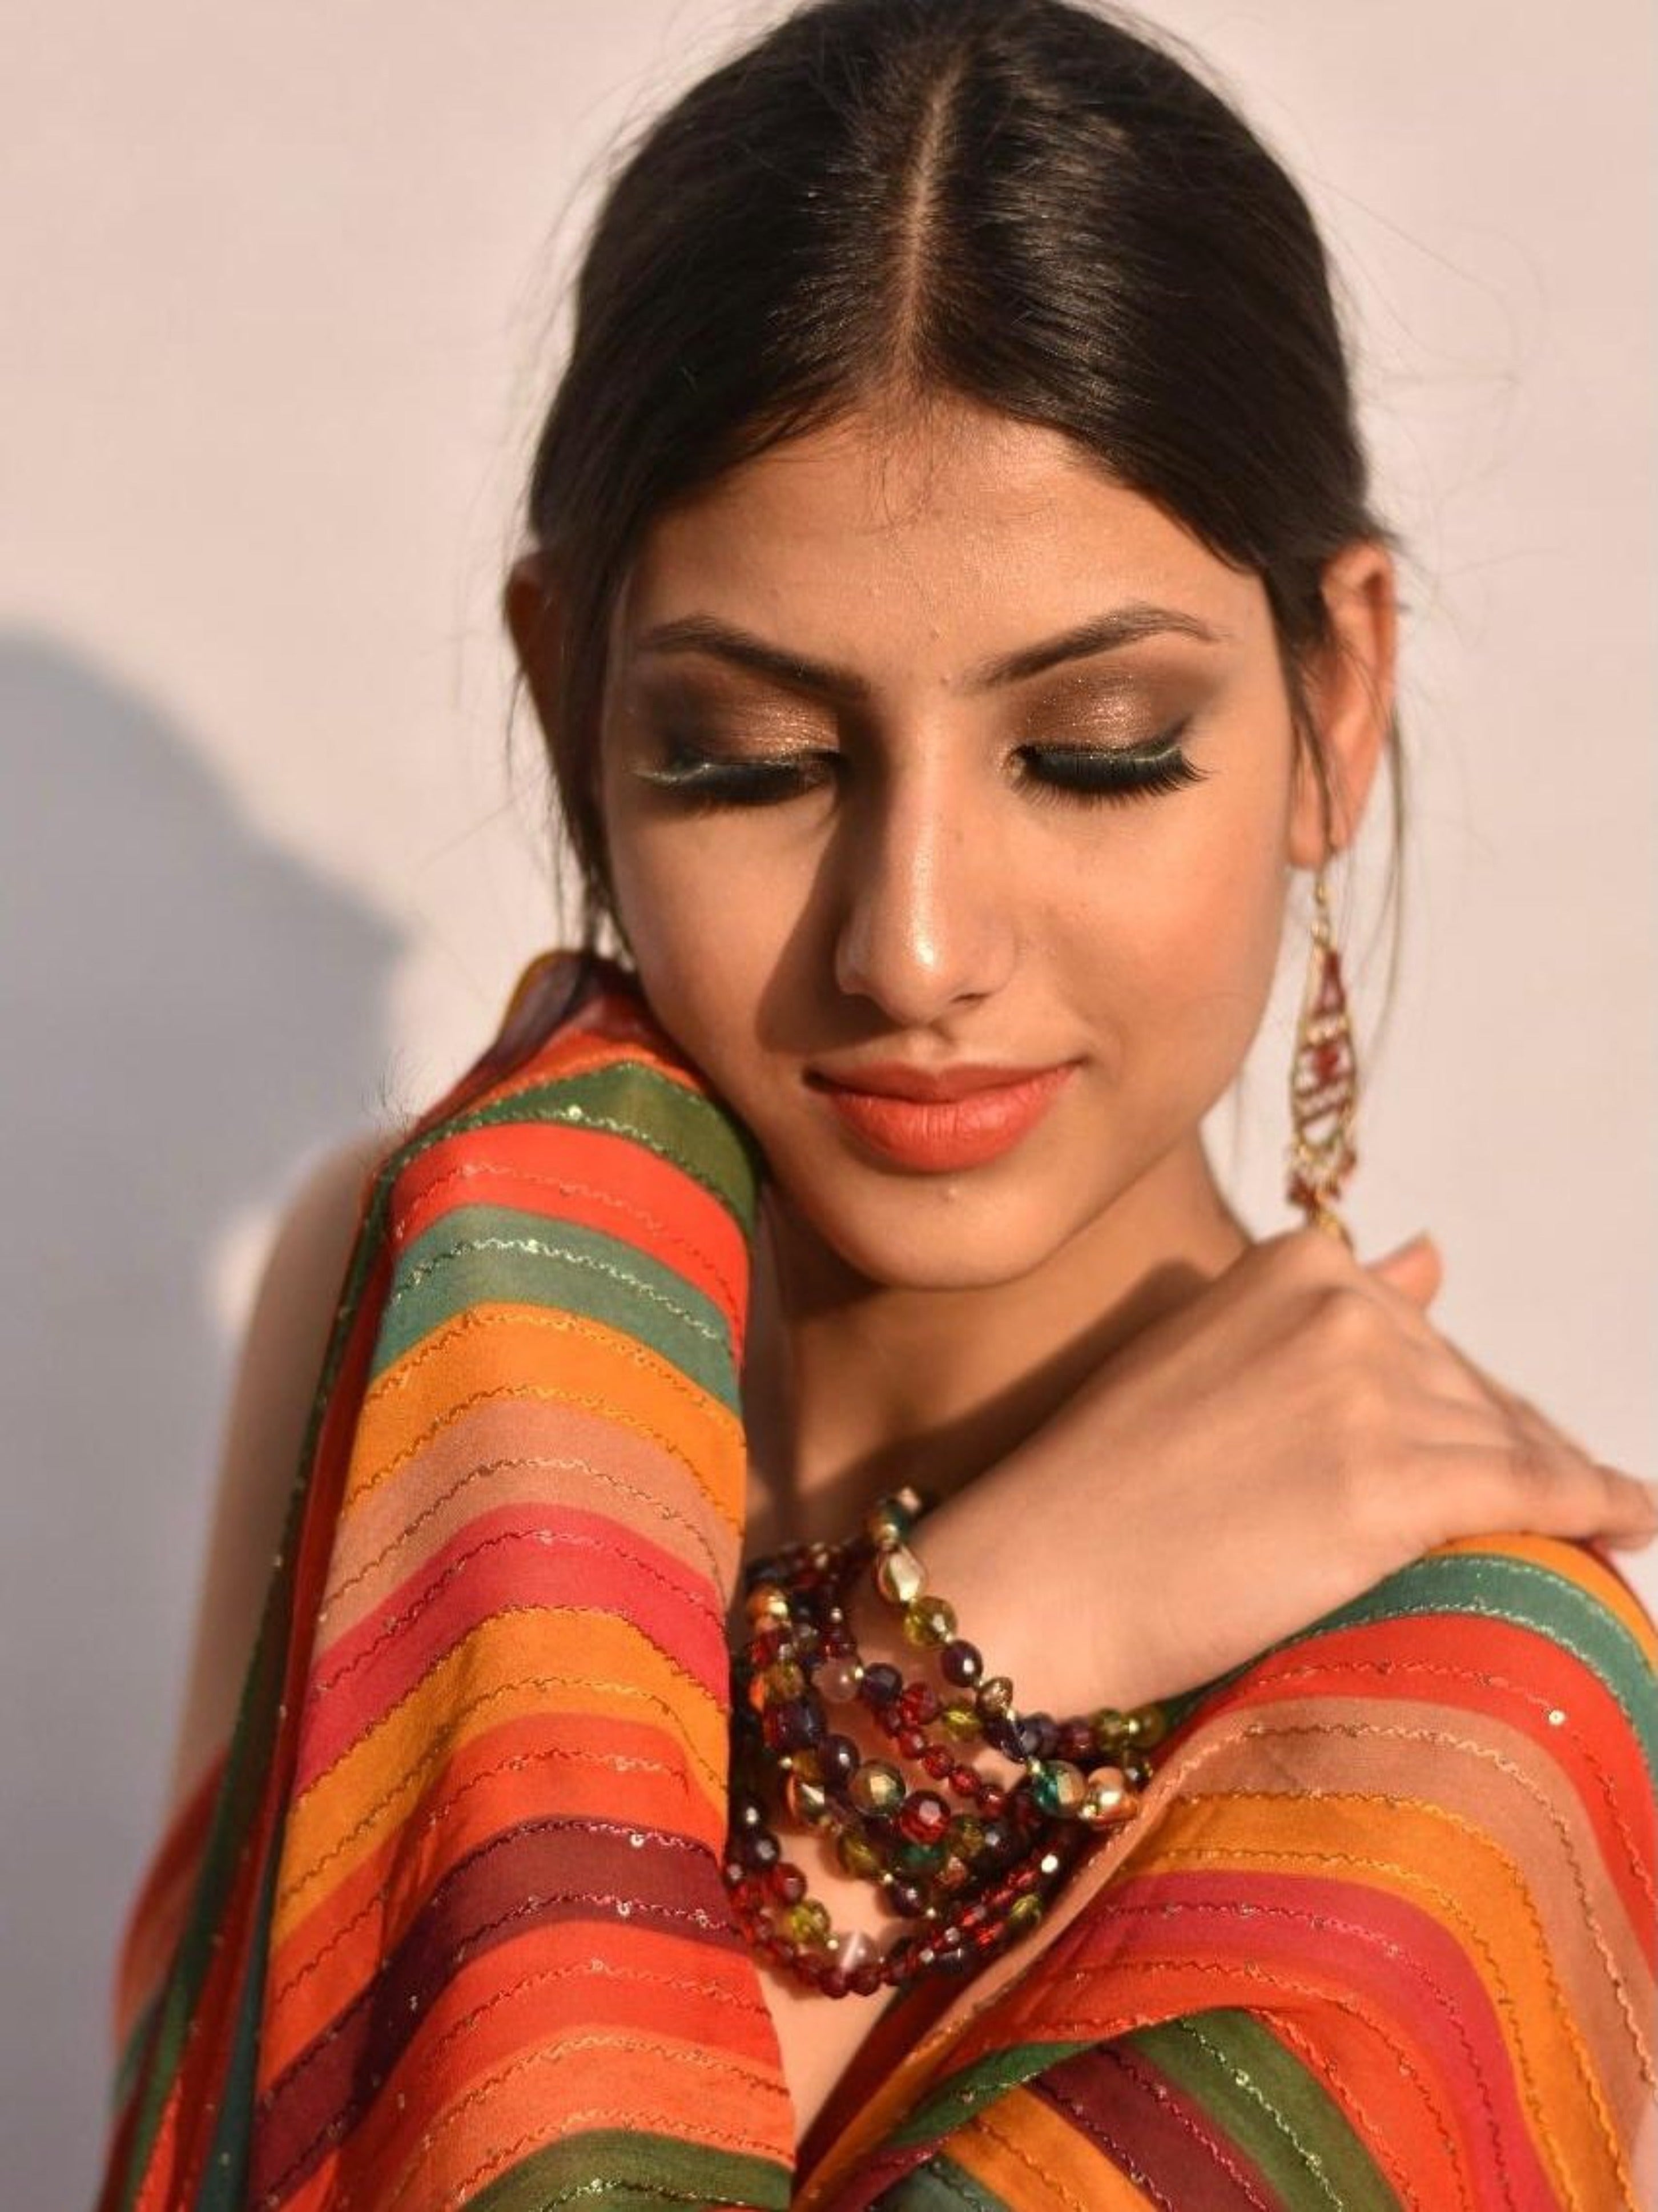 Bohemian Soul (Georgette Mutlicolour thread and sequins Saree)